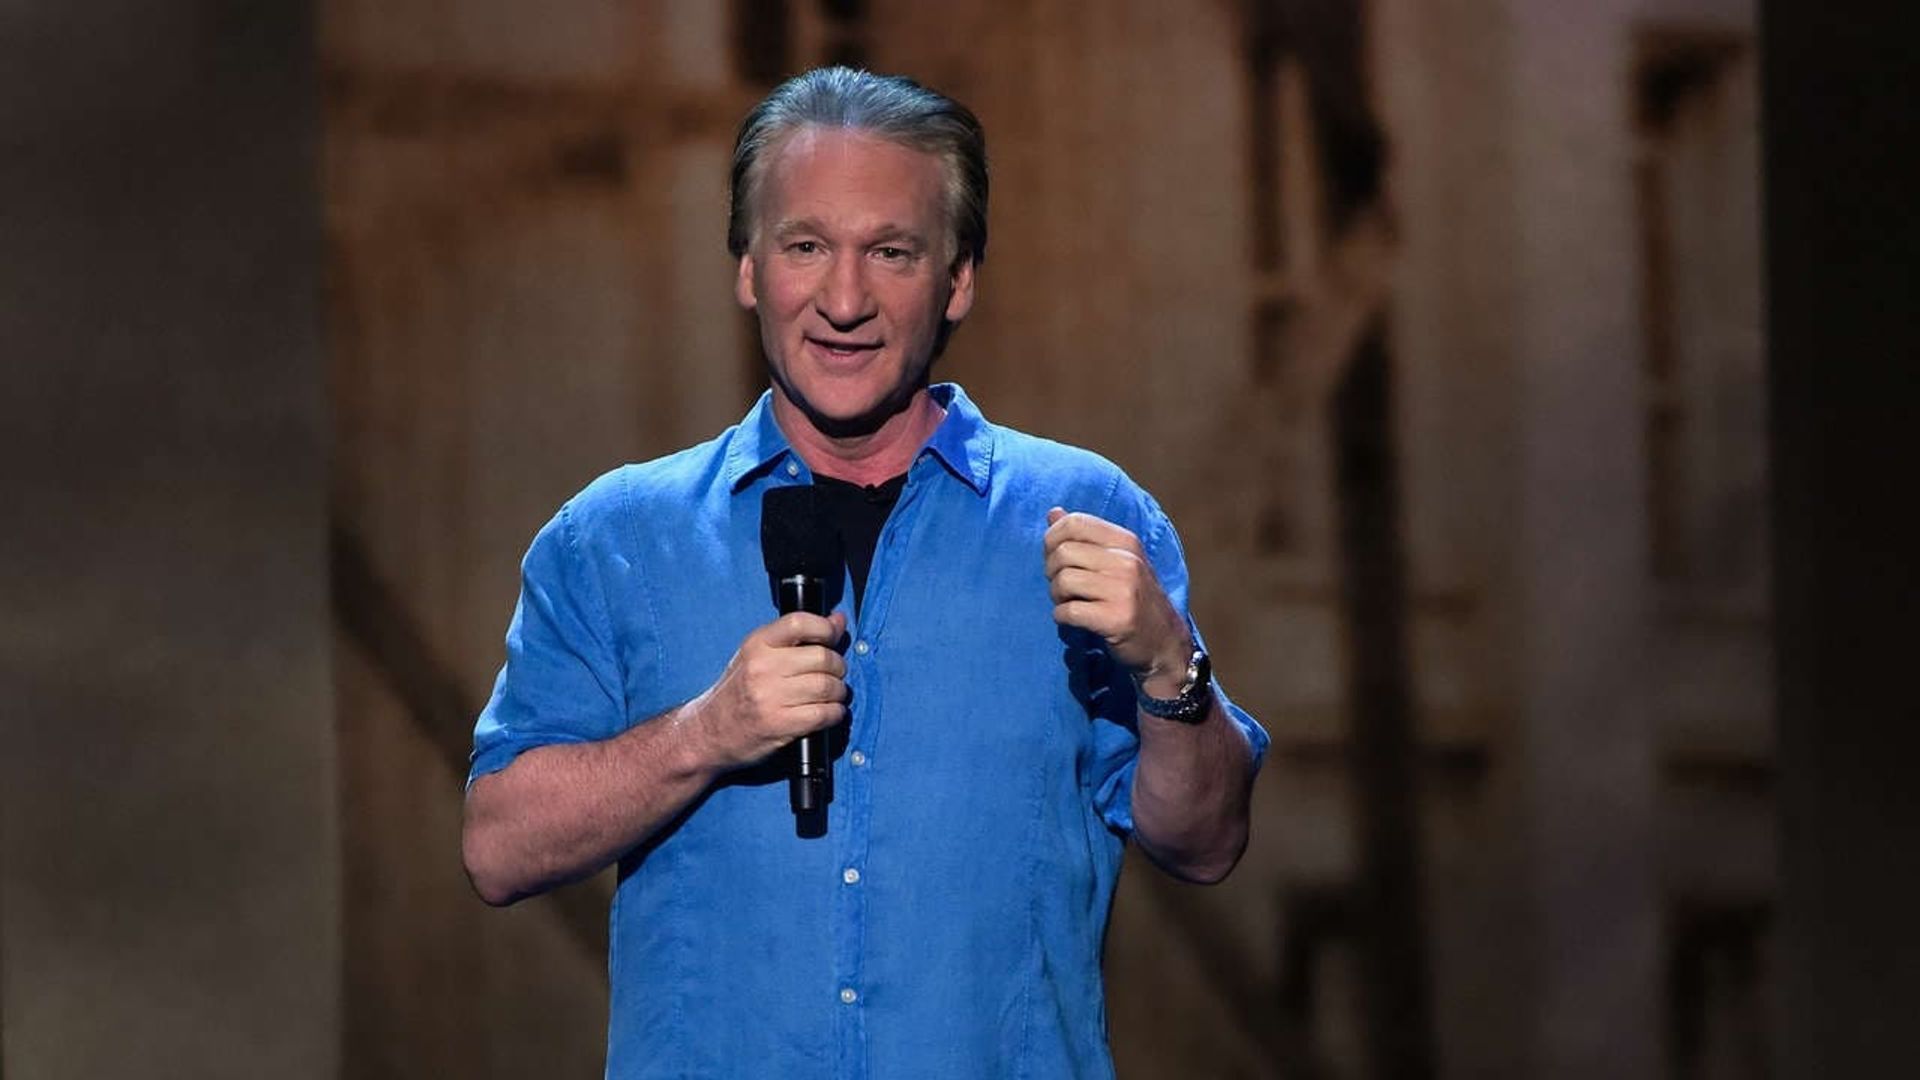 Bill Maher: Live from D.C. background